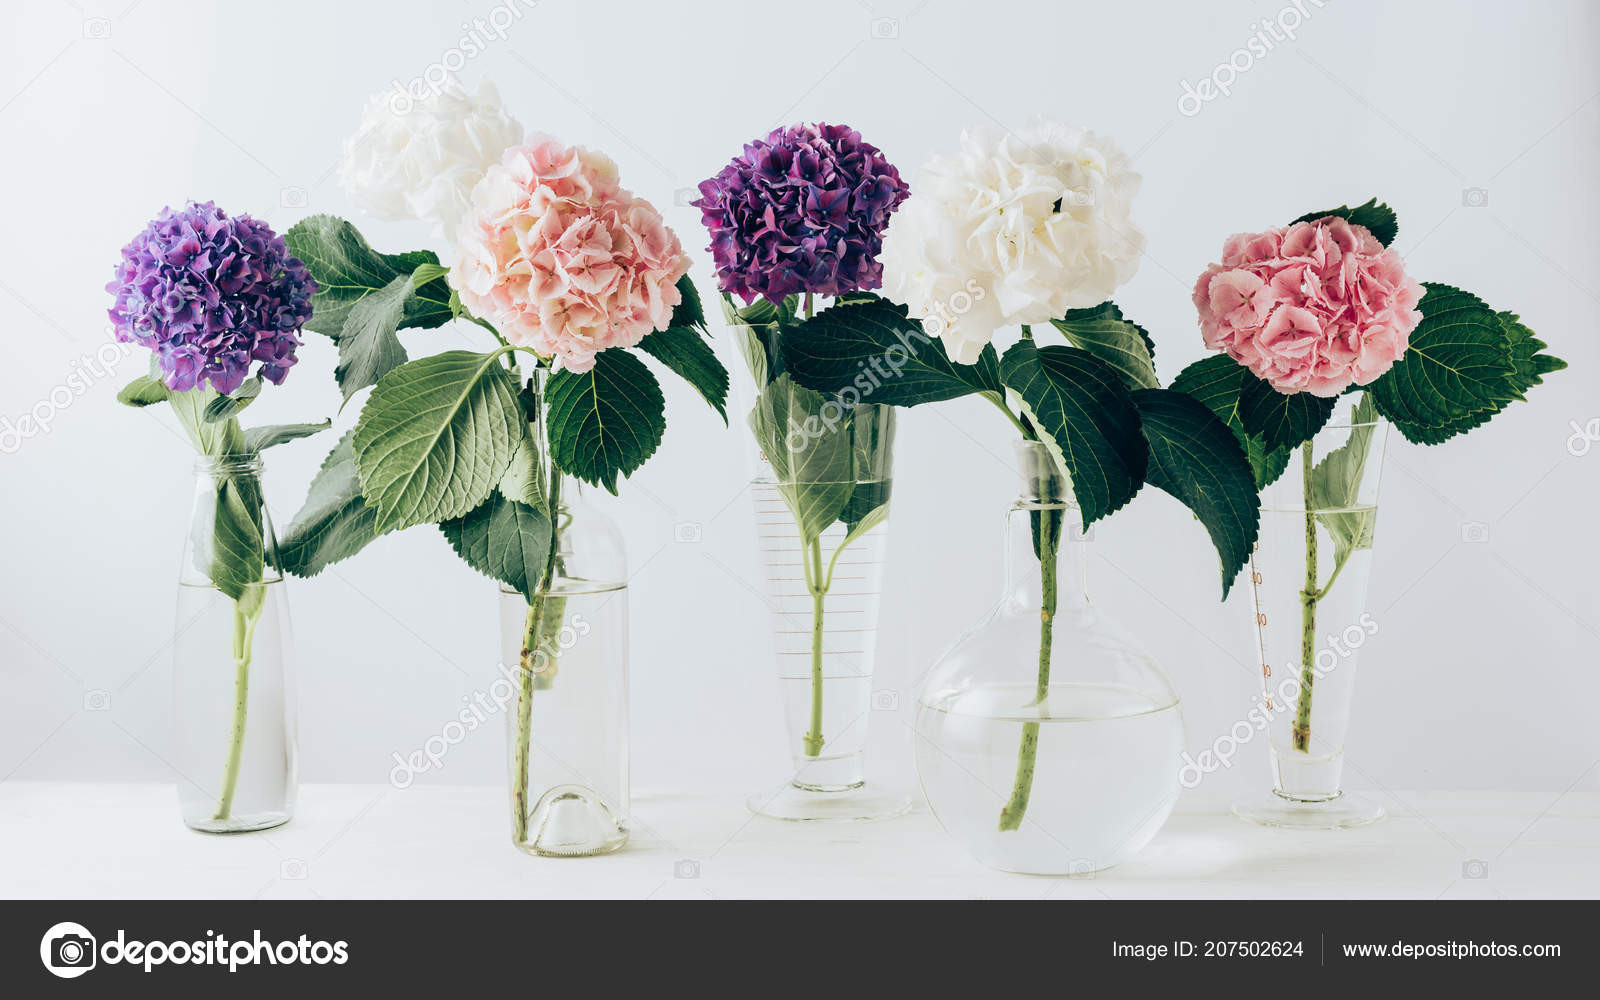 24 Lovable Pink Flowers In Glass Vase 2024 free download pink flowers in glass vase of beautiful colorful blooming flowers hydrangea glass vases white with regard to beautiful colorful blooming flowers of hydrangea in glass vases on white zdjac299